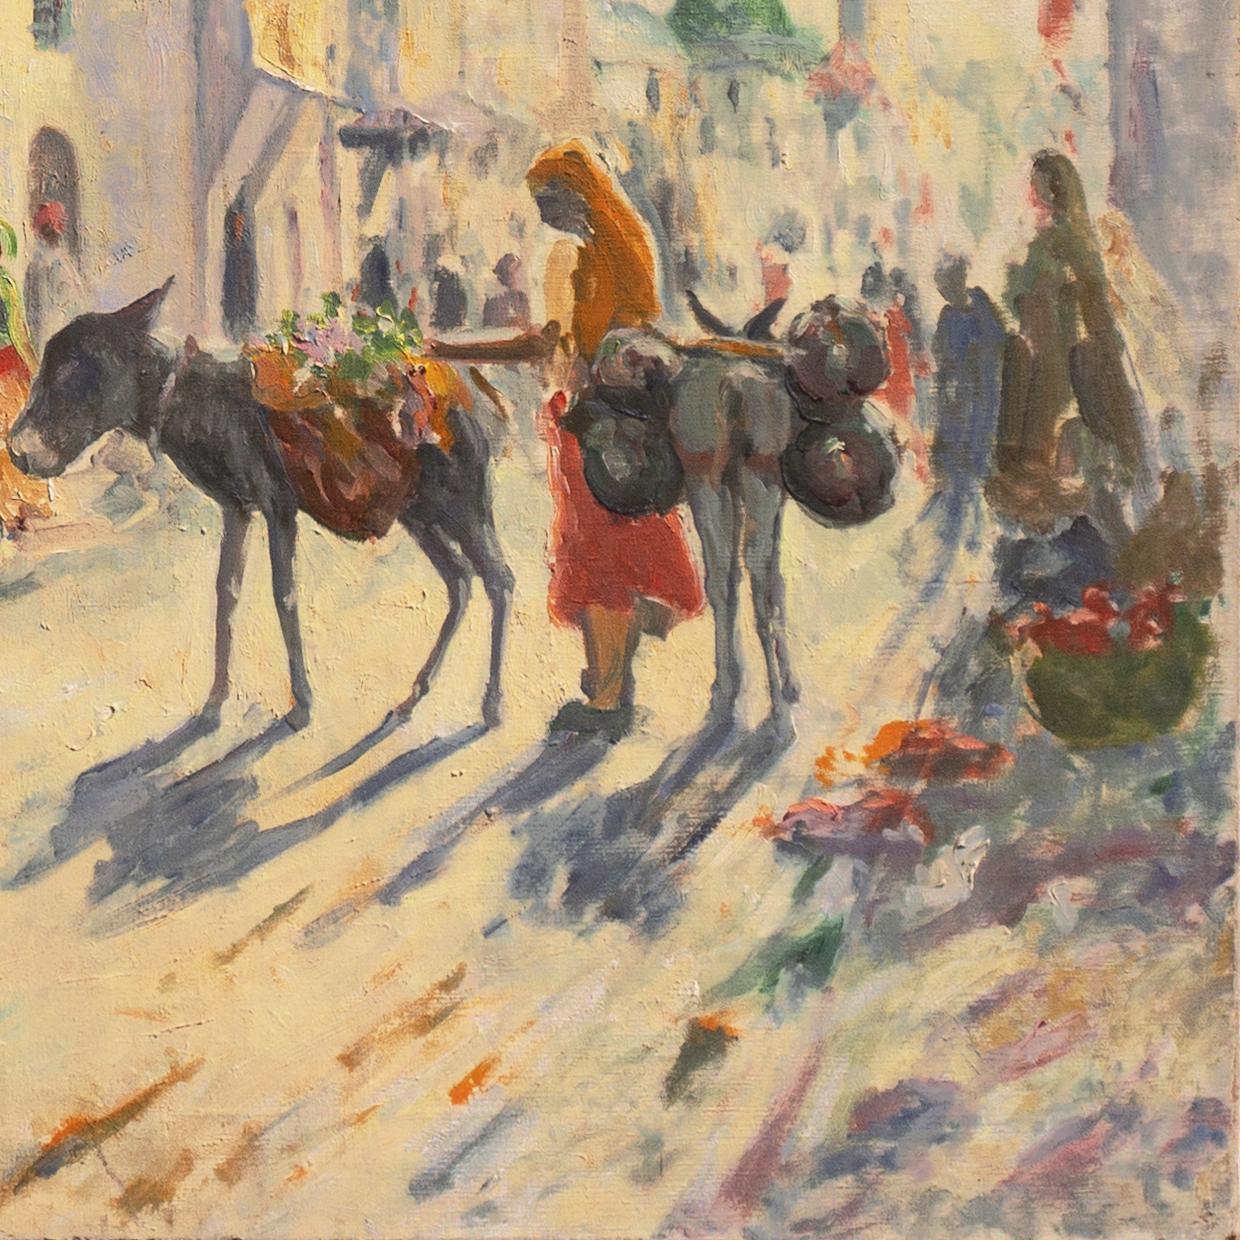 Signed lower left, 'Frank A. Brown' for Frank Arthur Brown (American, 1876-1962) and dated 1938. Titled, verso, on stretcher bar, 'Algerian Street', additionally signed, 'Frank A Brown - Paris' and with artist's New York label. 

An early